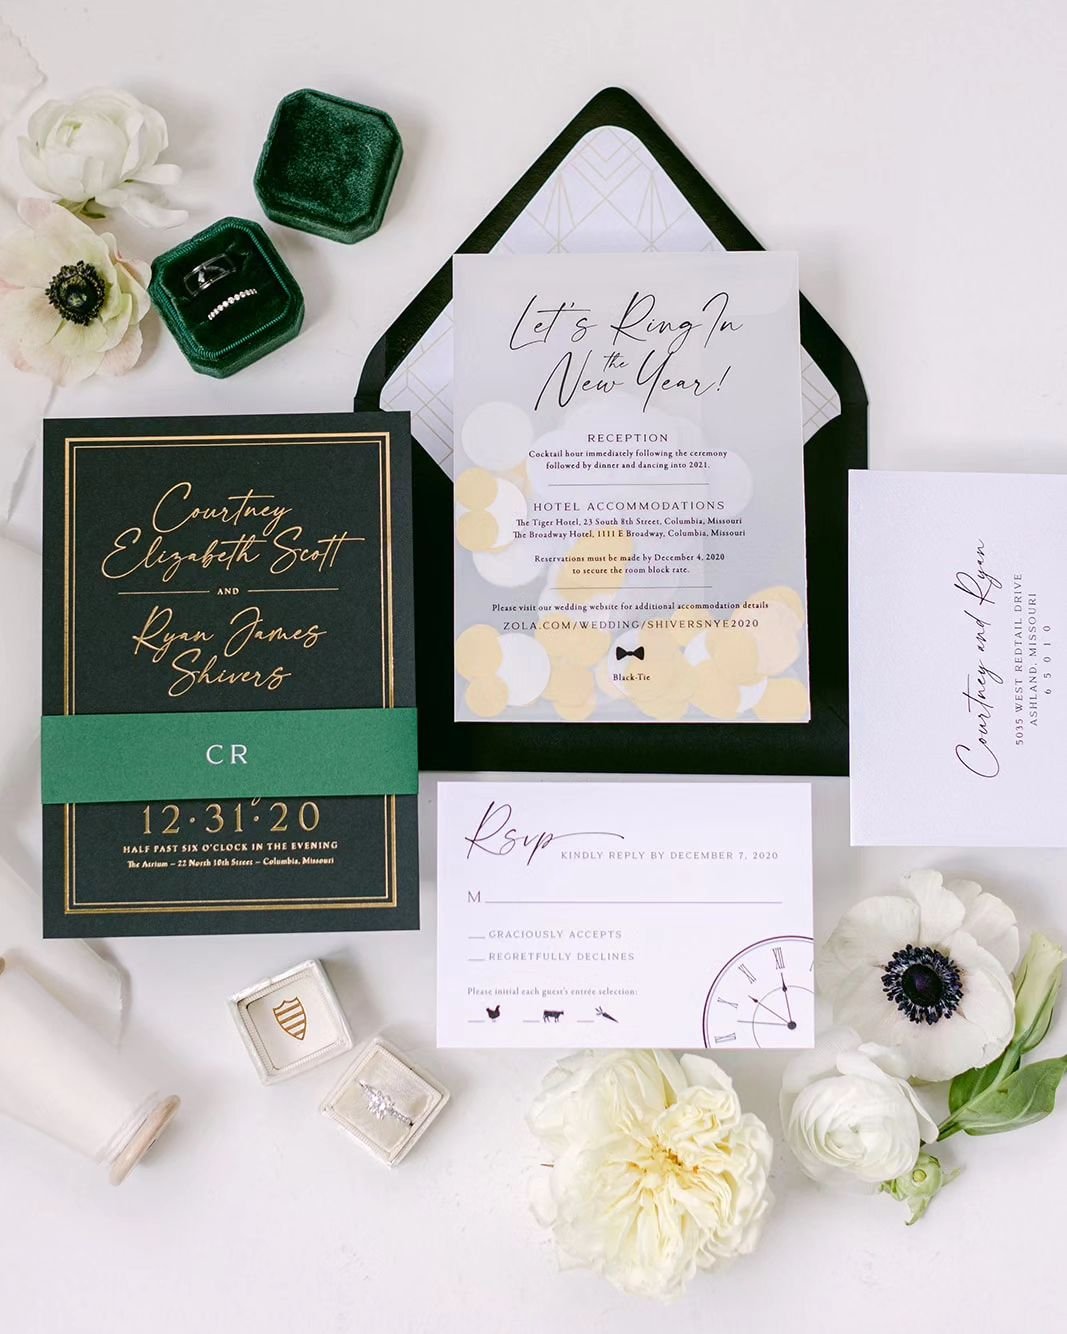 Delightful details that arrive in the hands of your guests set the stage for the magic of your wedding day.

Every aspect deserves significant care and attention, honoring this momentous occasion with the reverence it deserves. Of course, I believe t